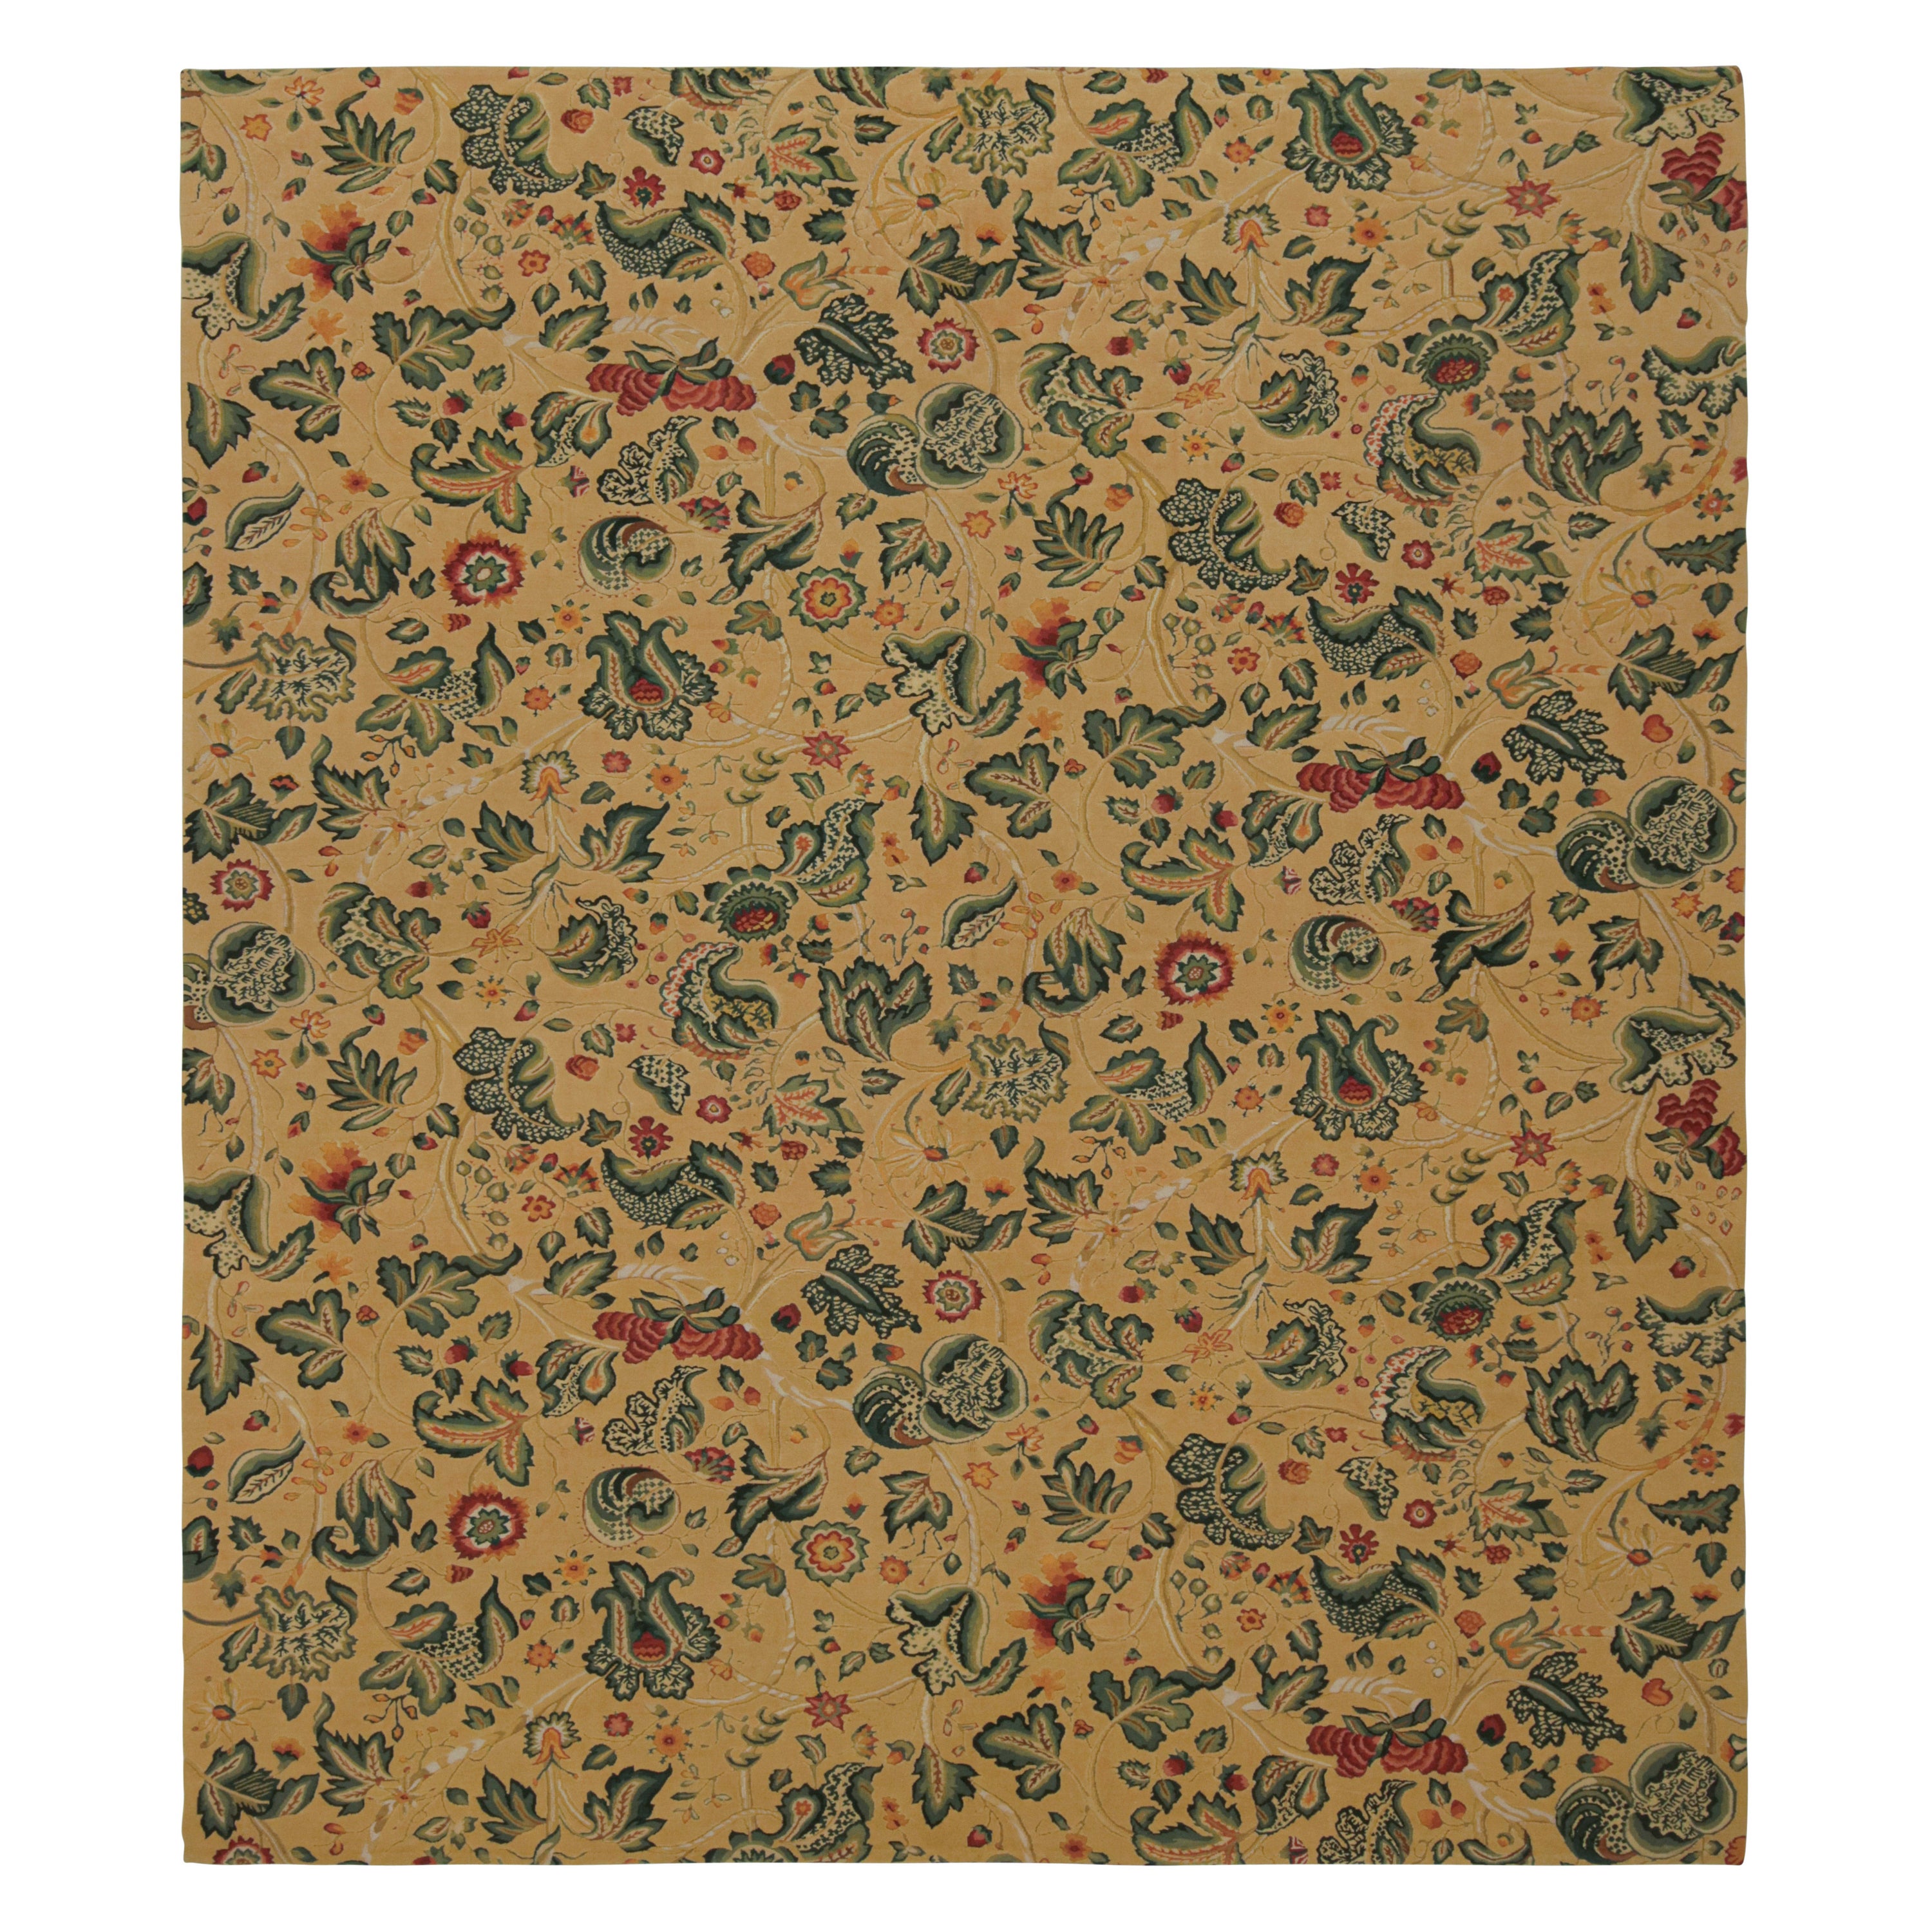 Tudor Chinese and East Asian Rugs